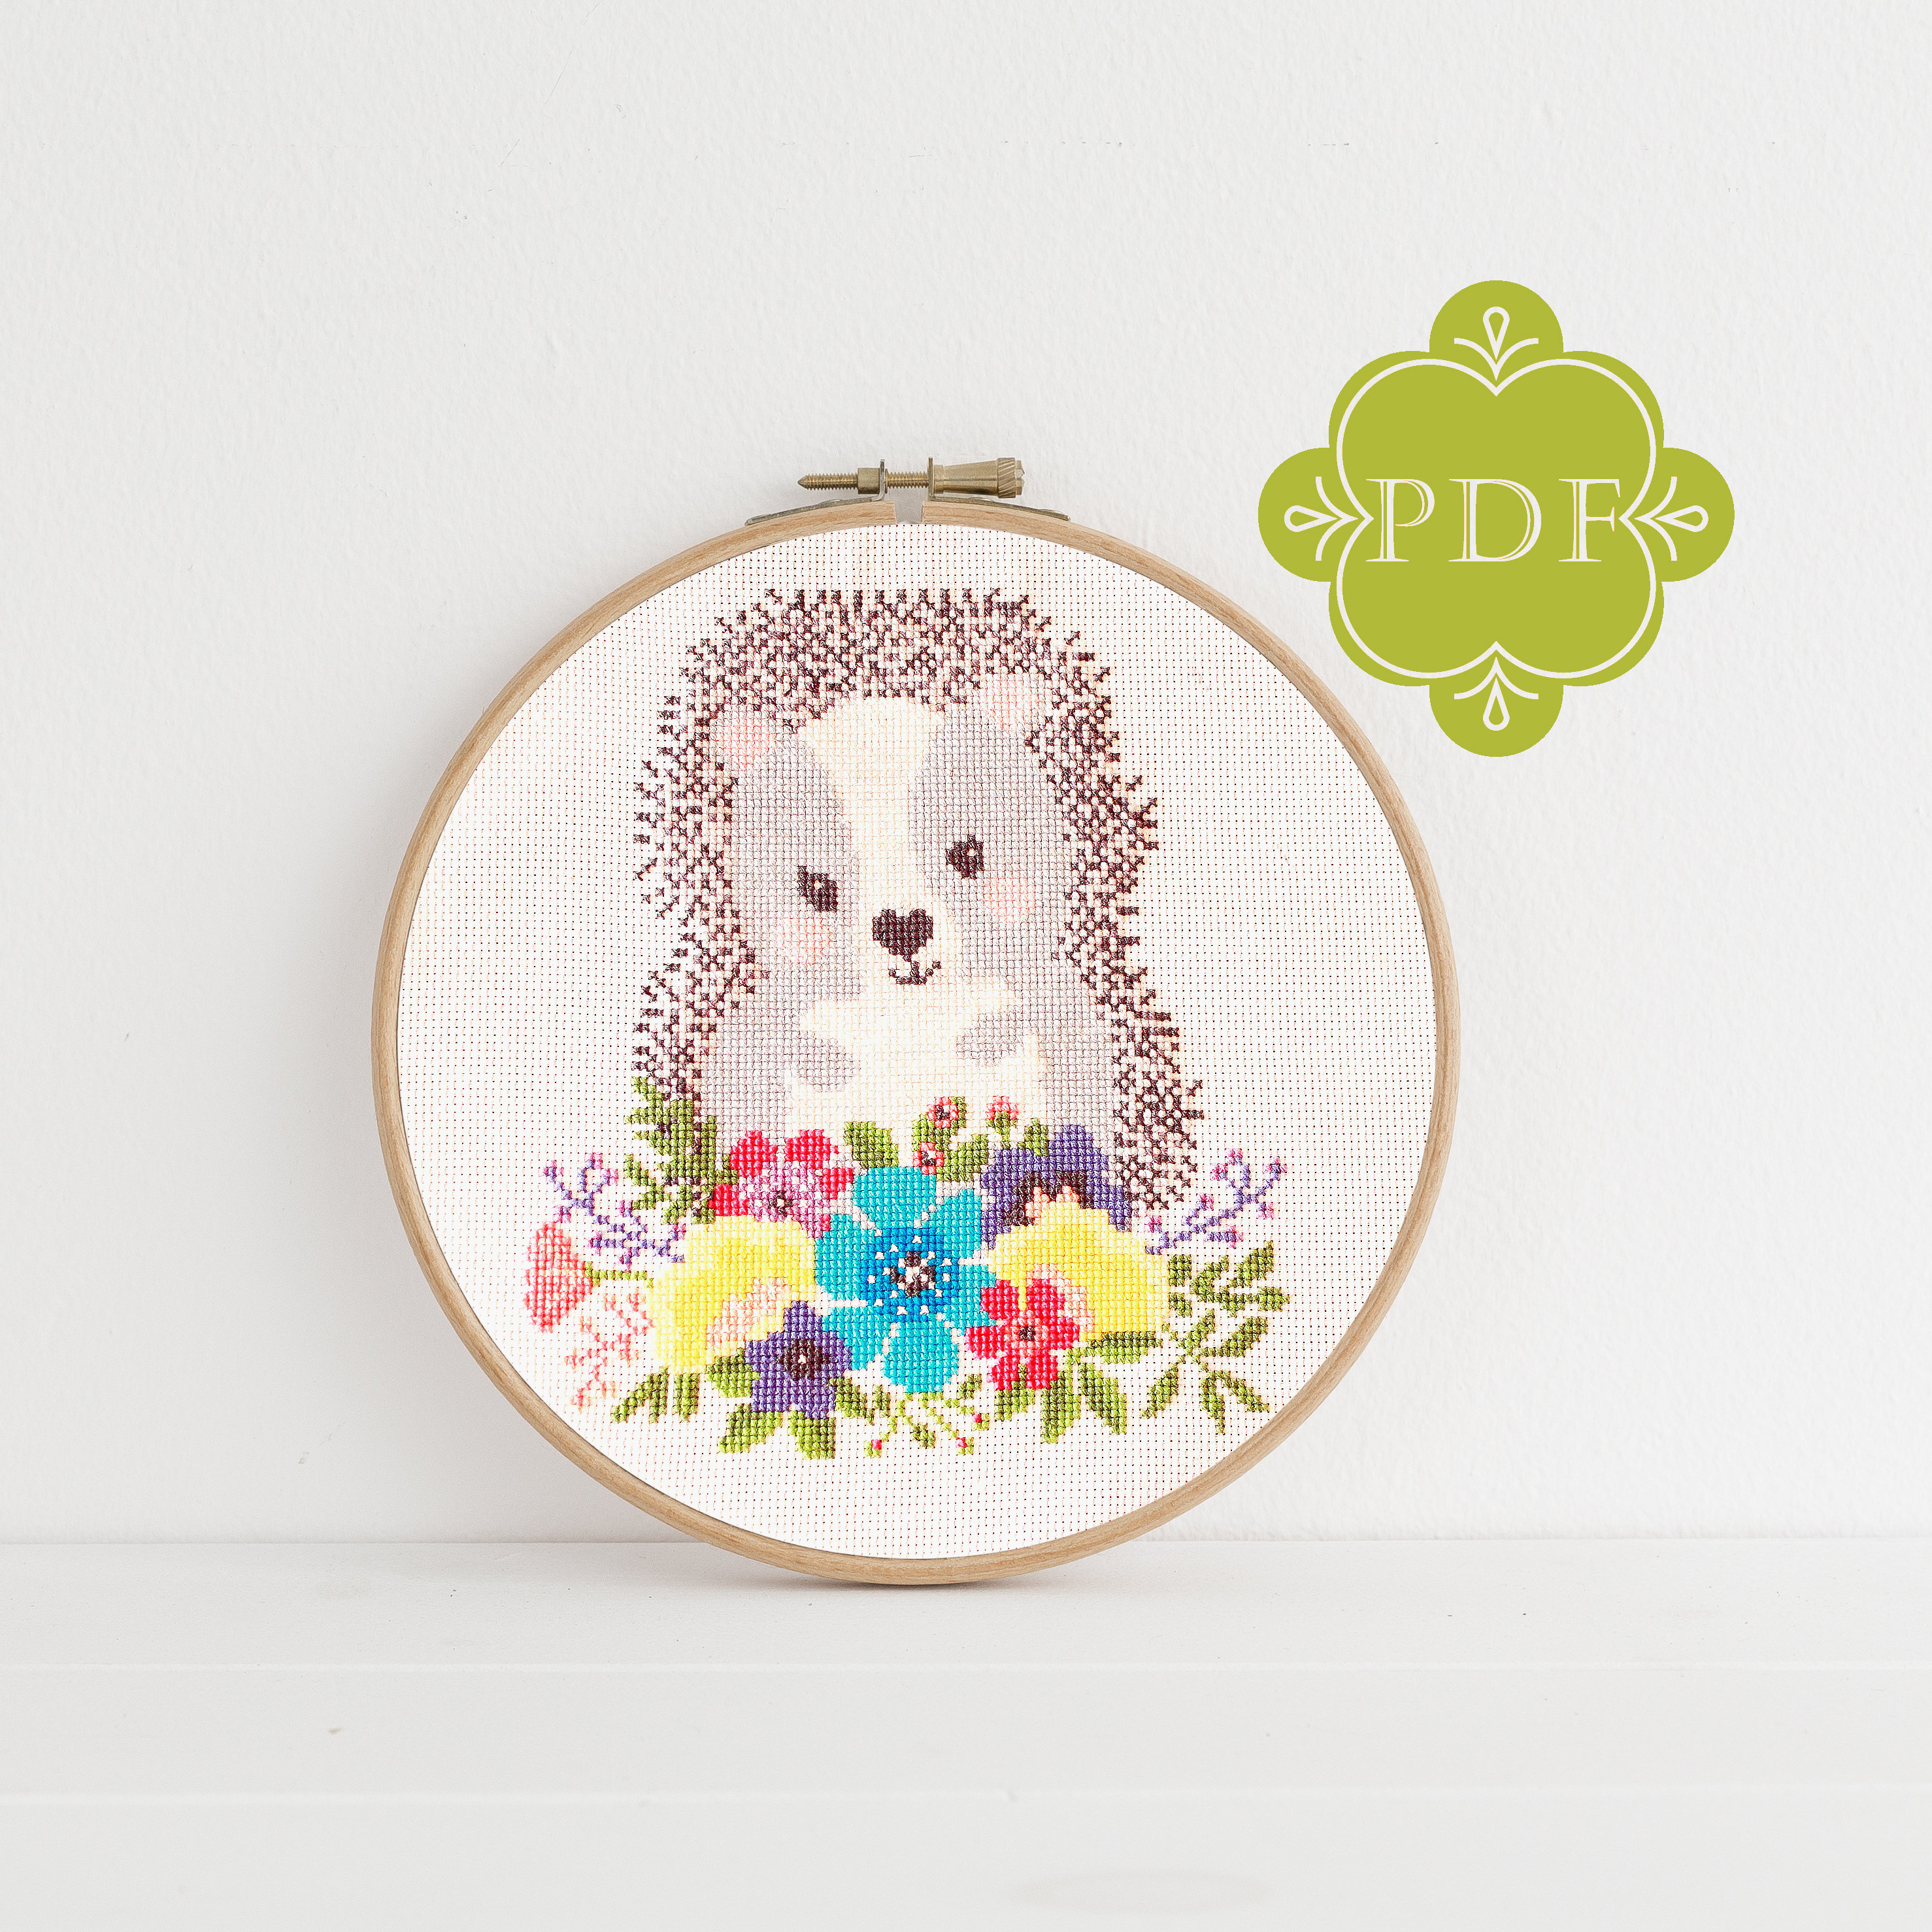 Dmc Embroidery Patterns Pdf Counted Cross Stitch Hedgehog Hedgehog Cross Stitch Pattern